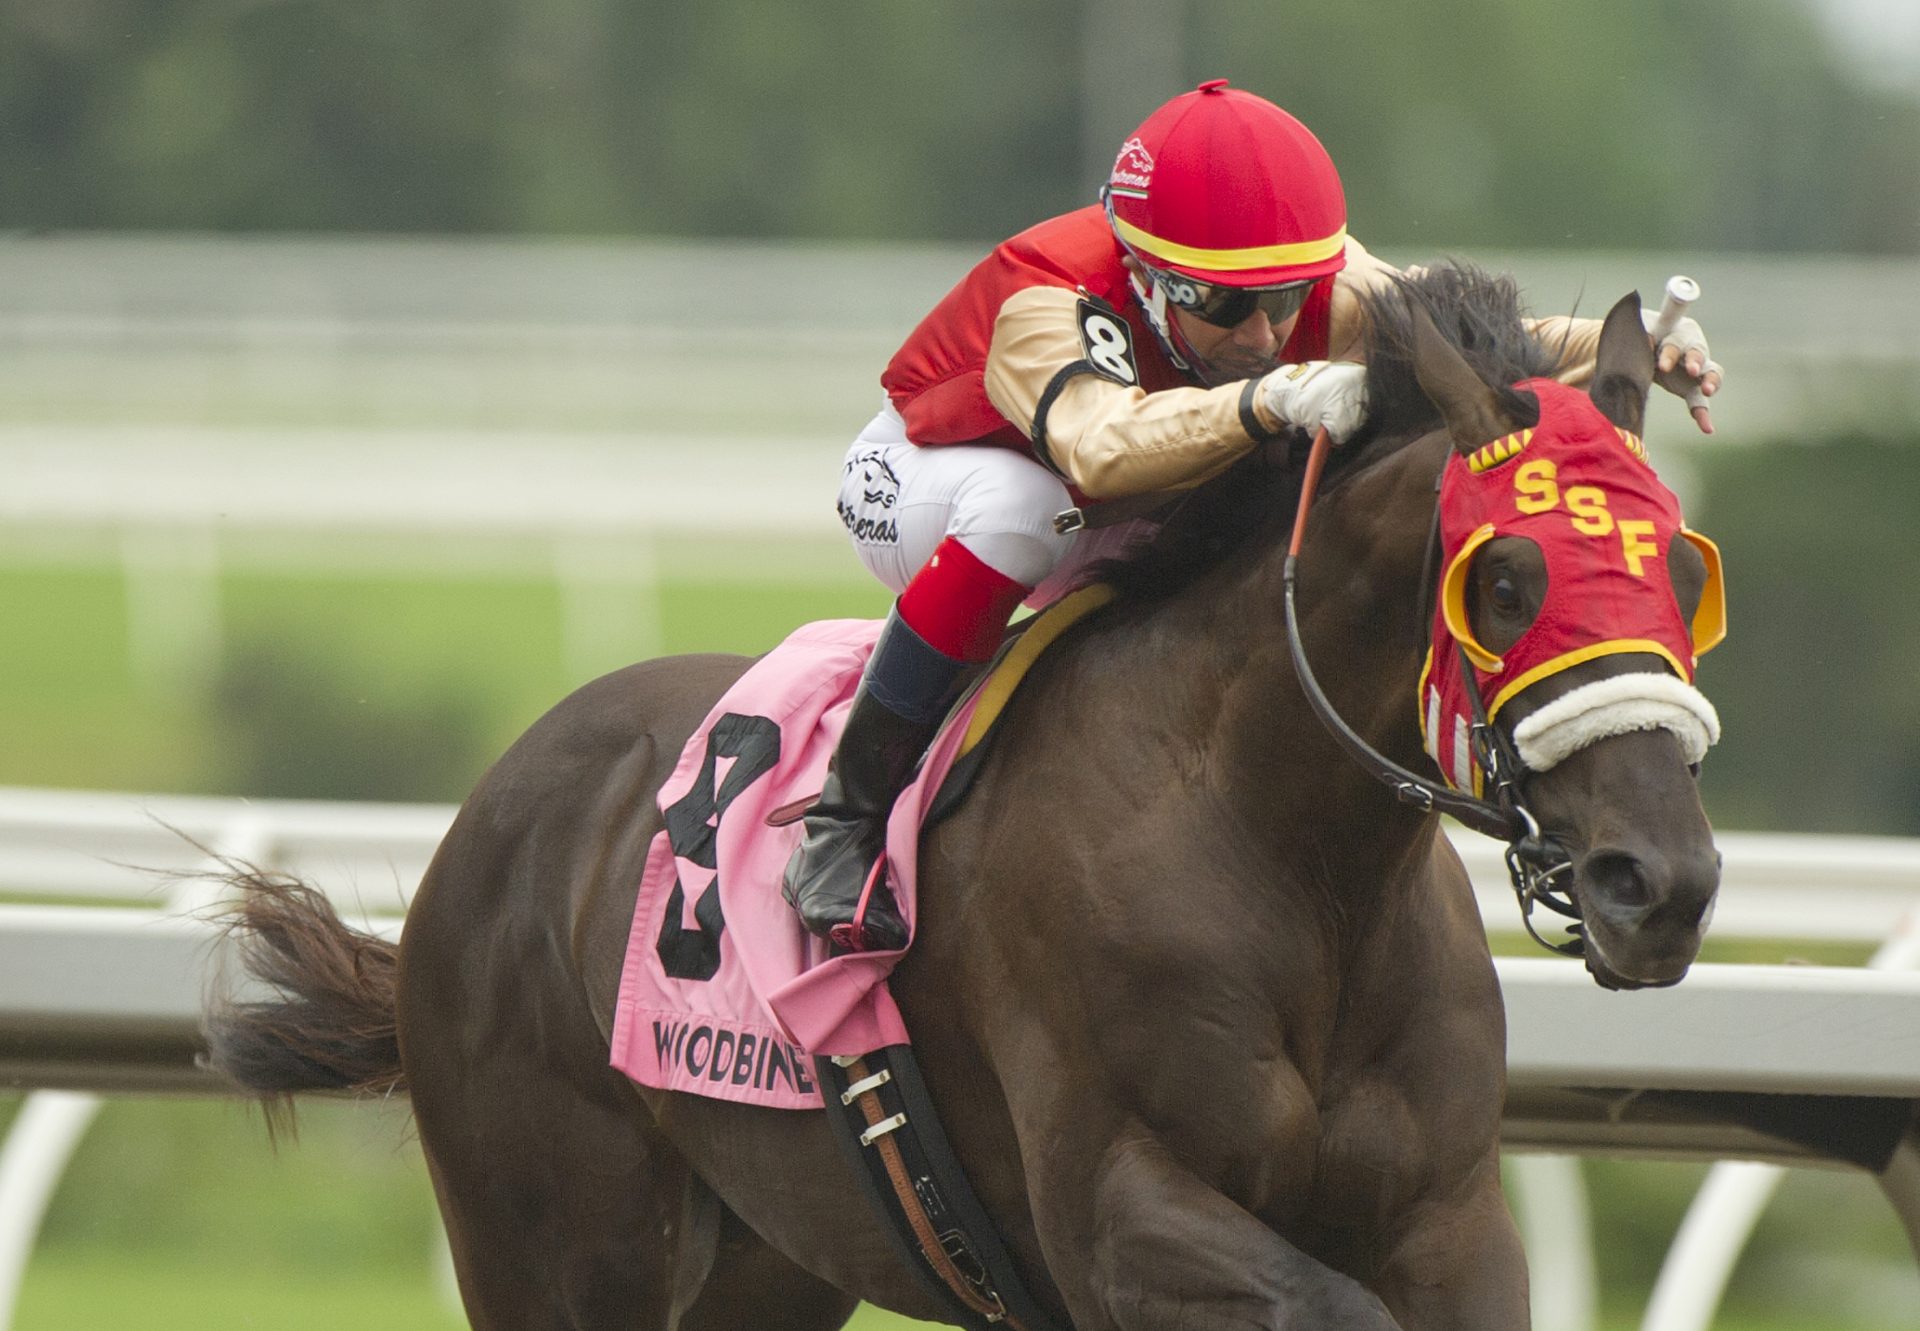 Tio Magico (Uncle Mo) wins the Queenston Stakes at Woodbine